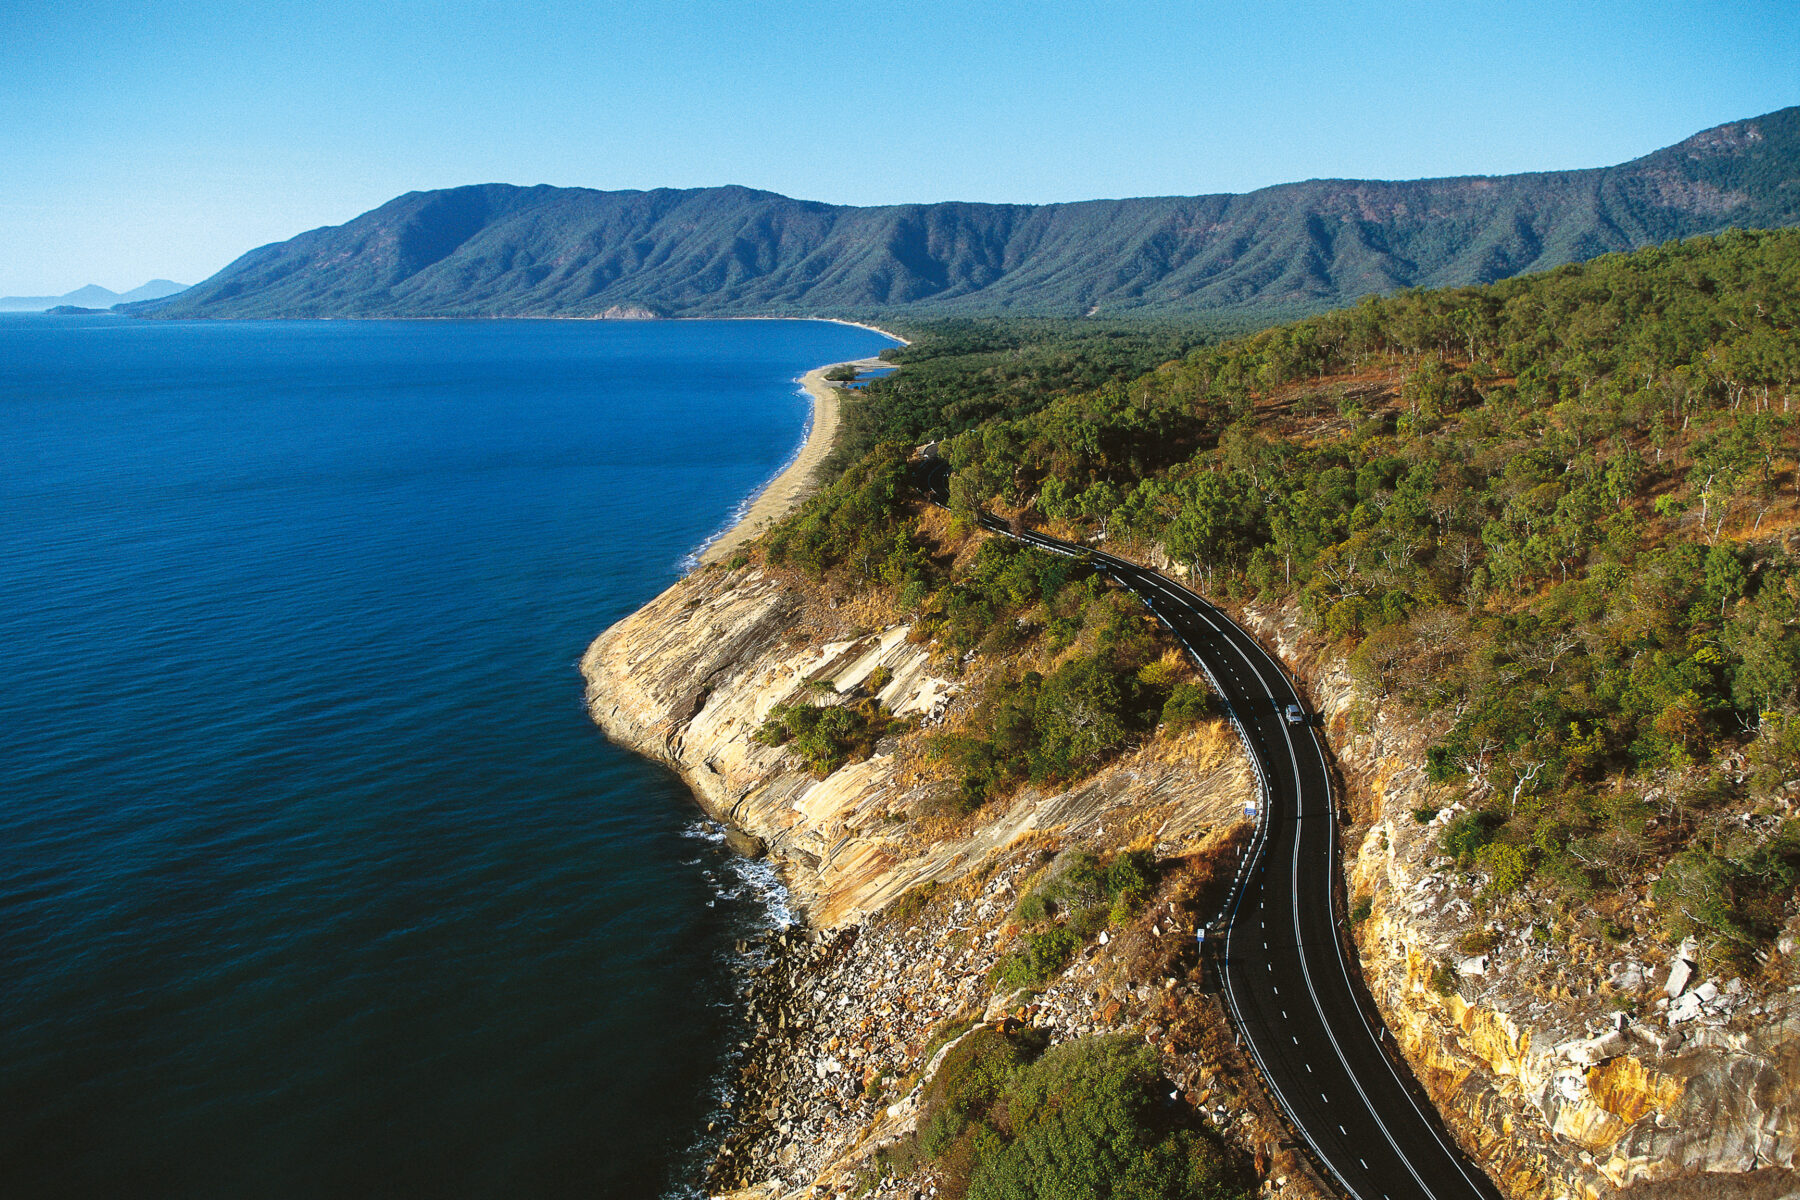 How to get to Port Douglas and Daintree